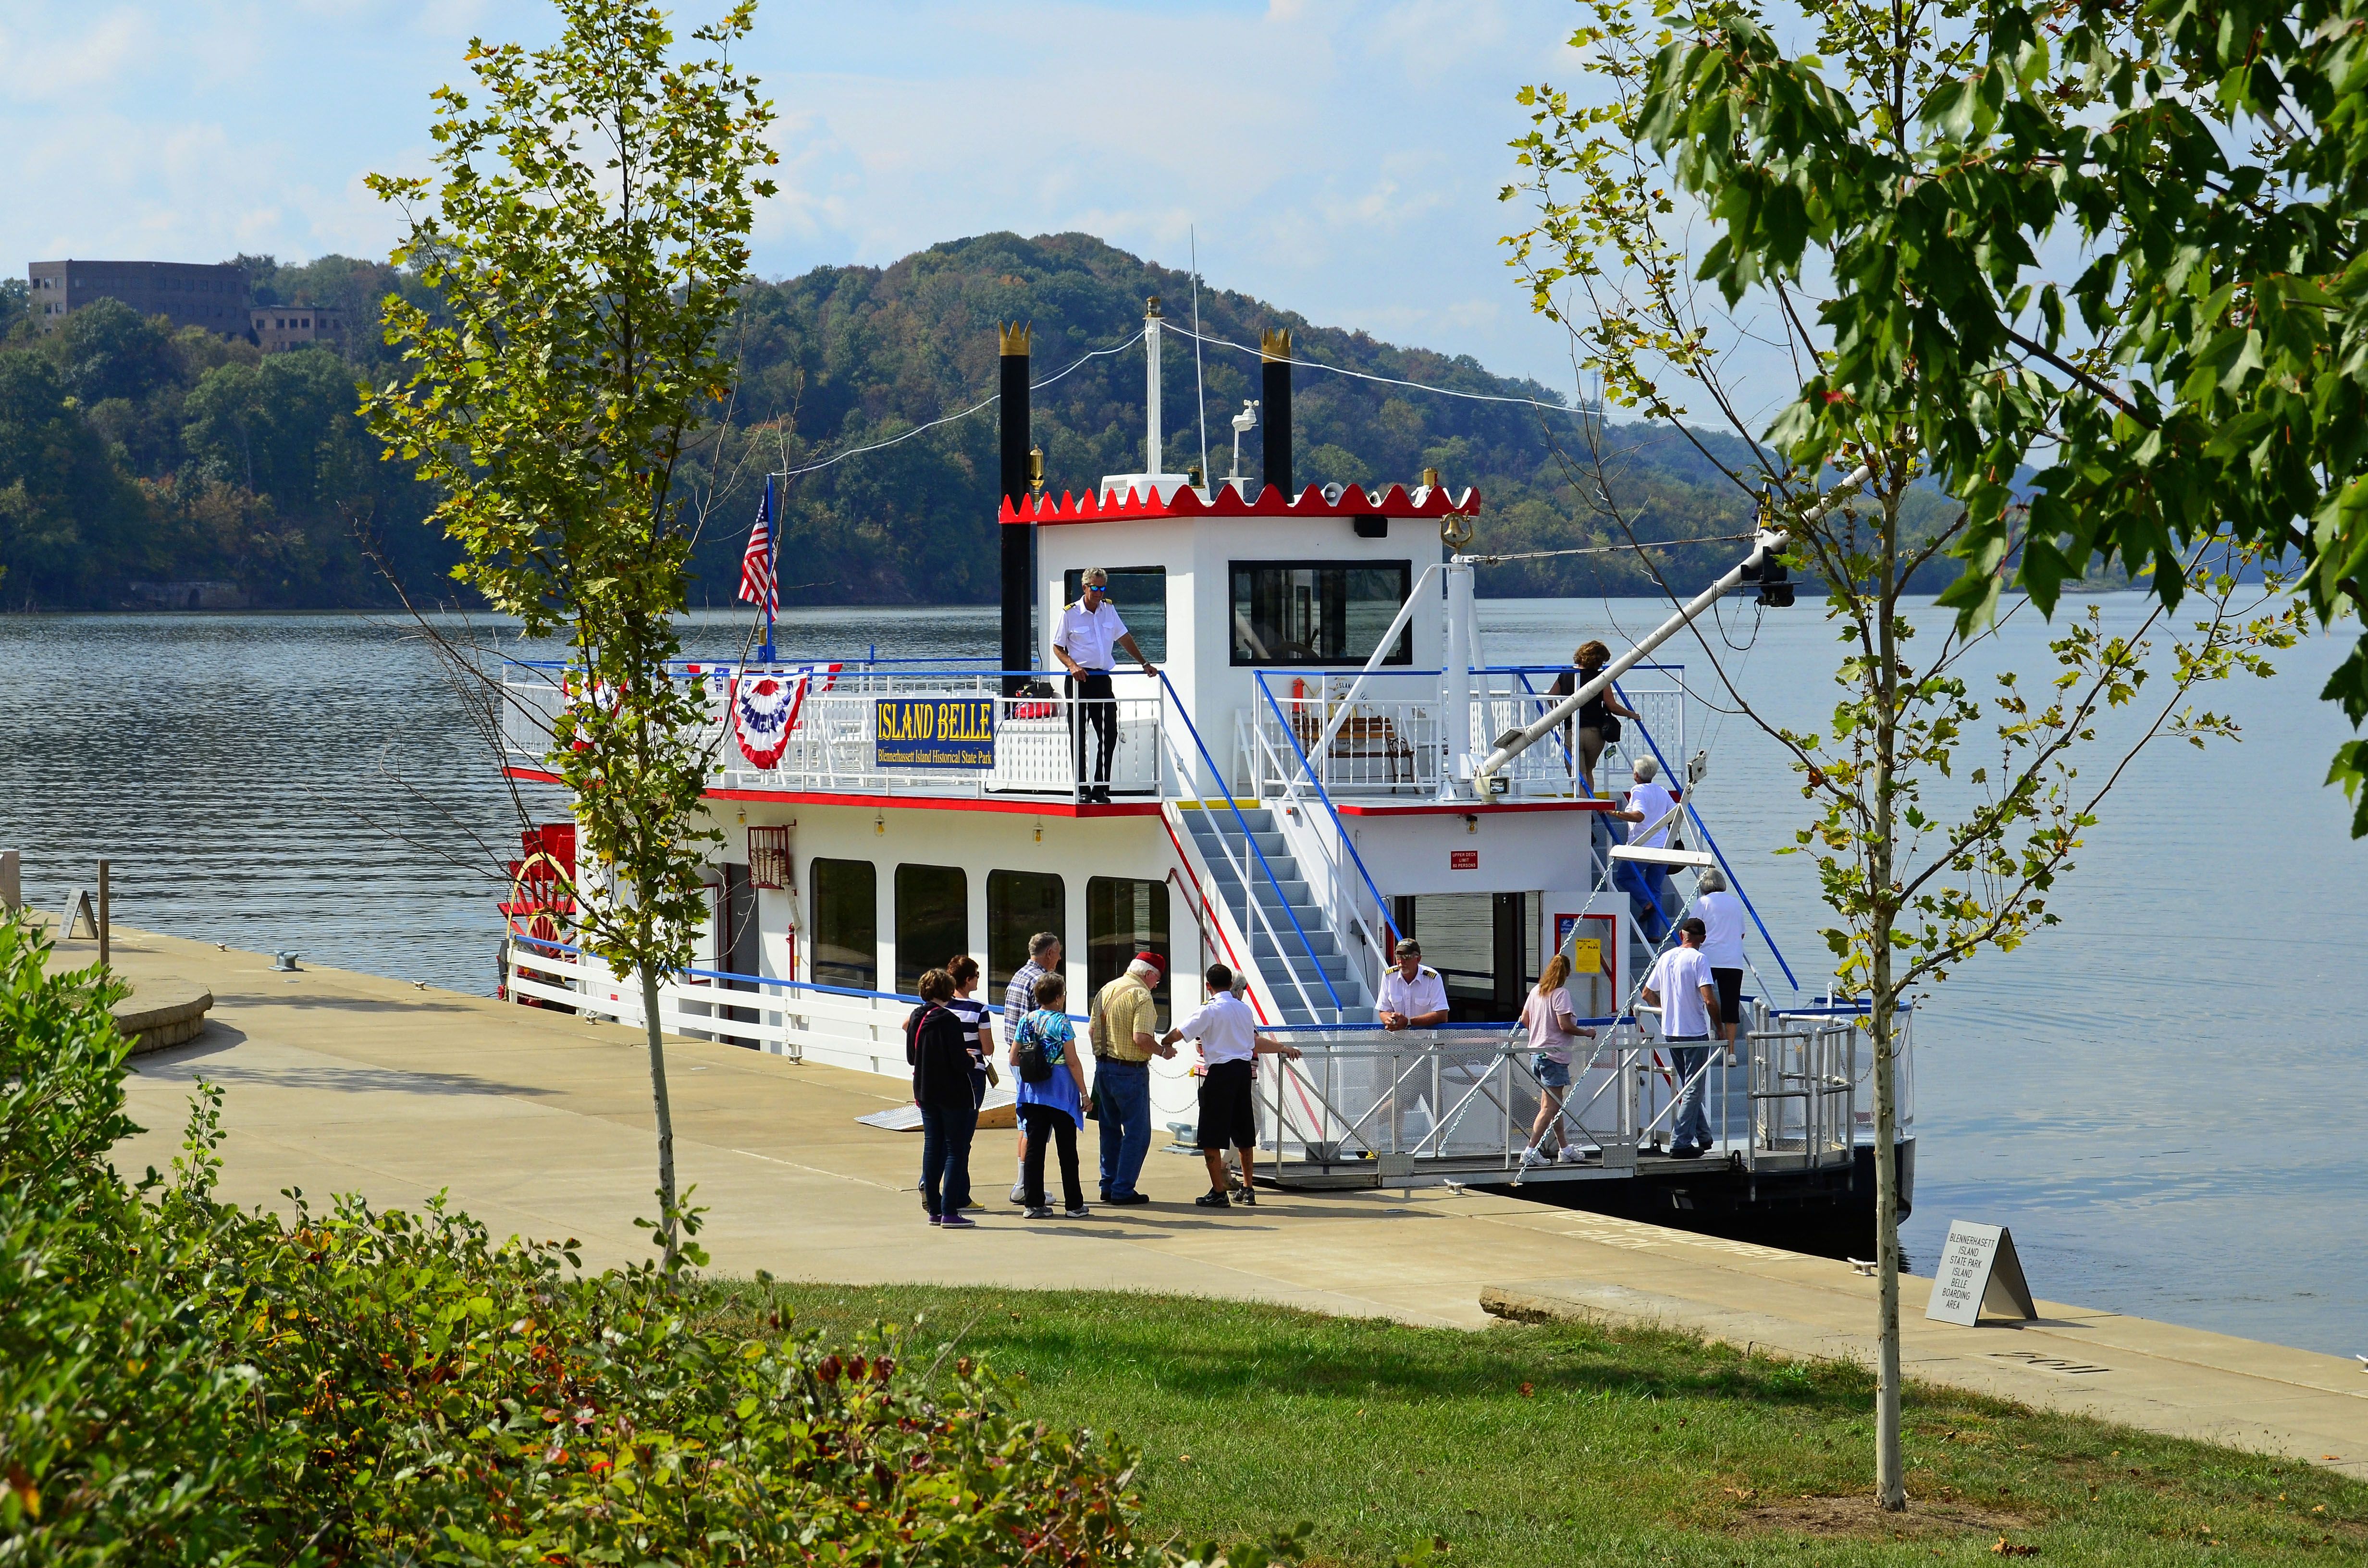 Photo Courtesy of the West Virginia Department of Commerce.  The Island Belle sternwheeler takes visitors to and from Blennerhassett Island State Park near Parkersburg. It also is available for charte